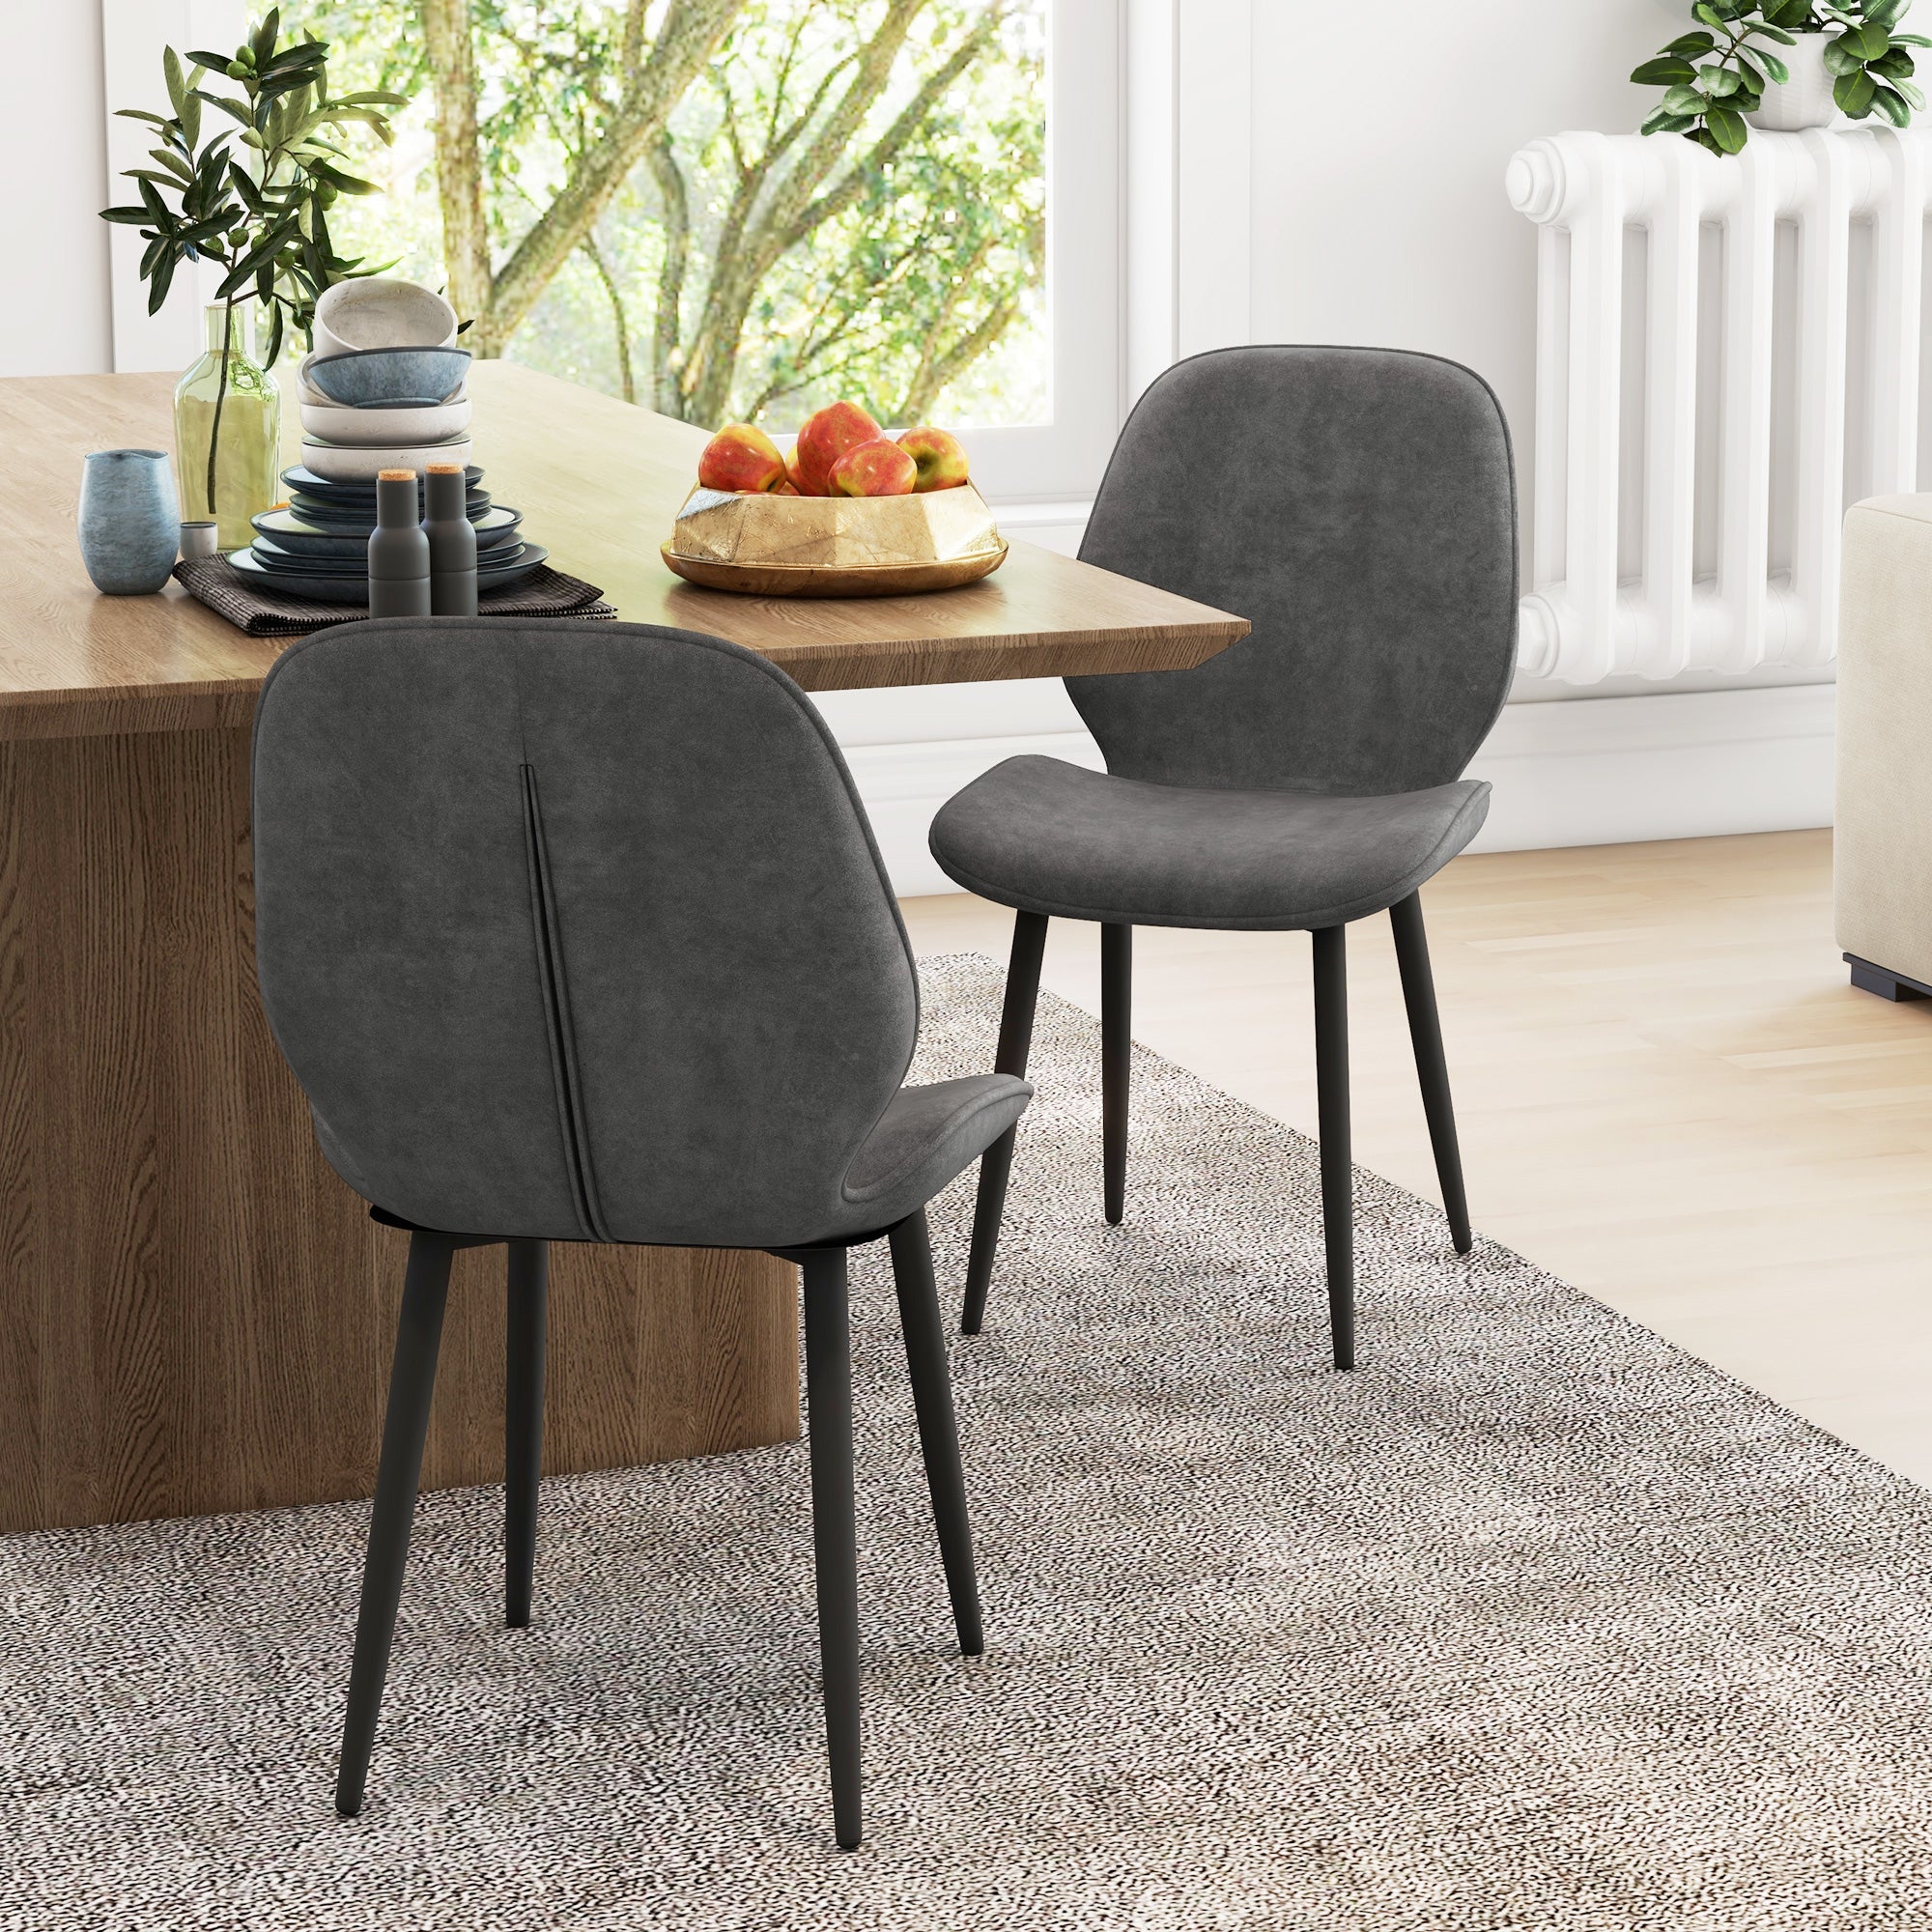 Velvet Dining Chairs, Set of 2 Dining Room Chairs with Metal Legs for Living Room, Dining Room, Grey-1